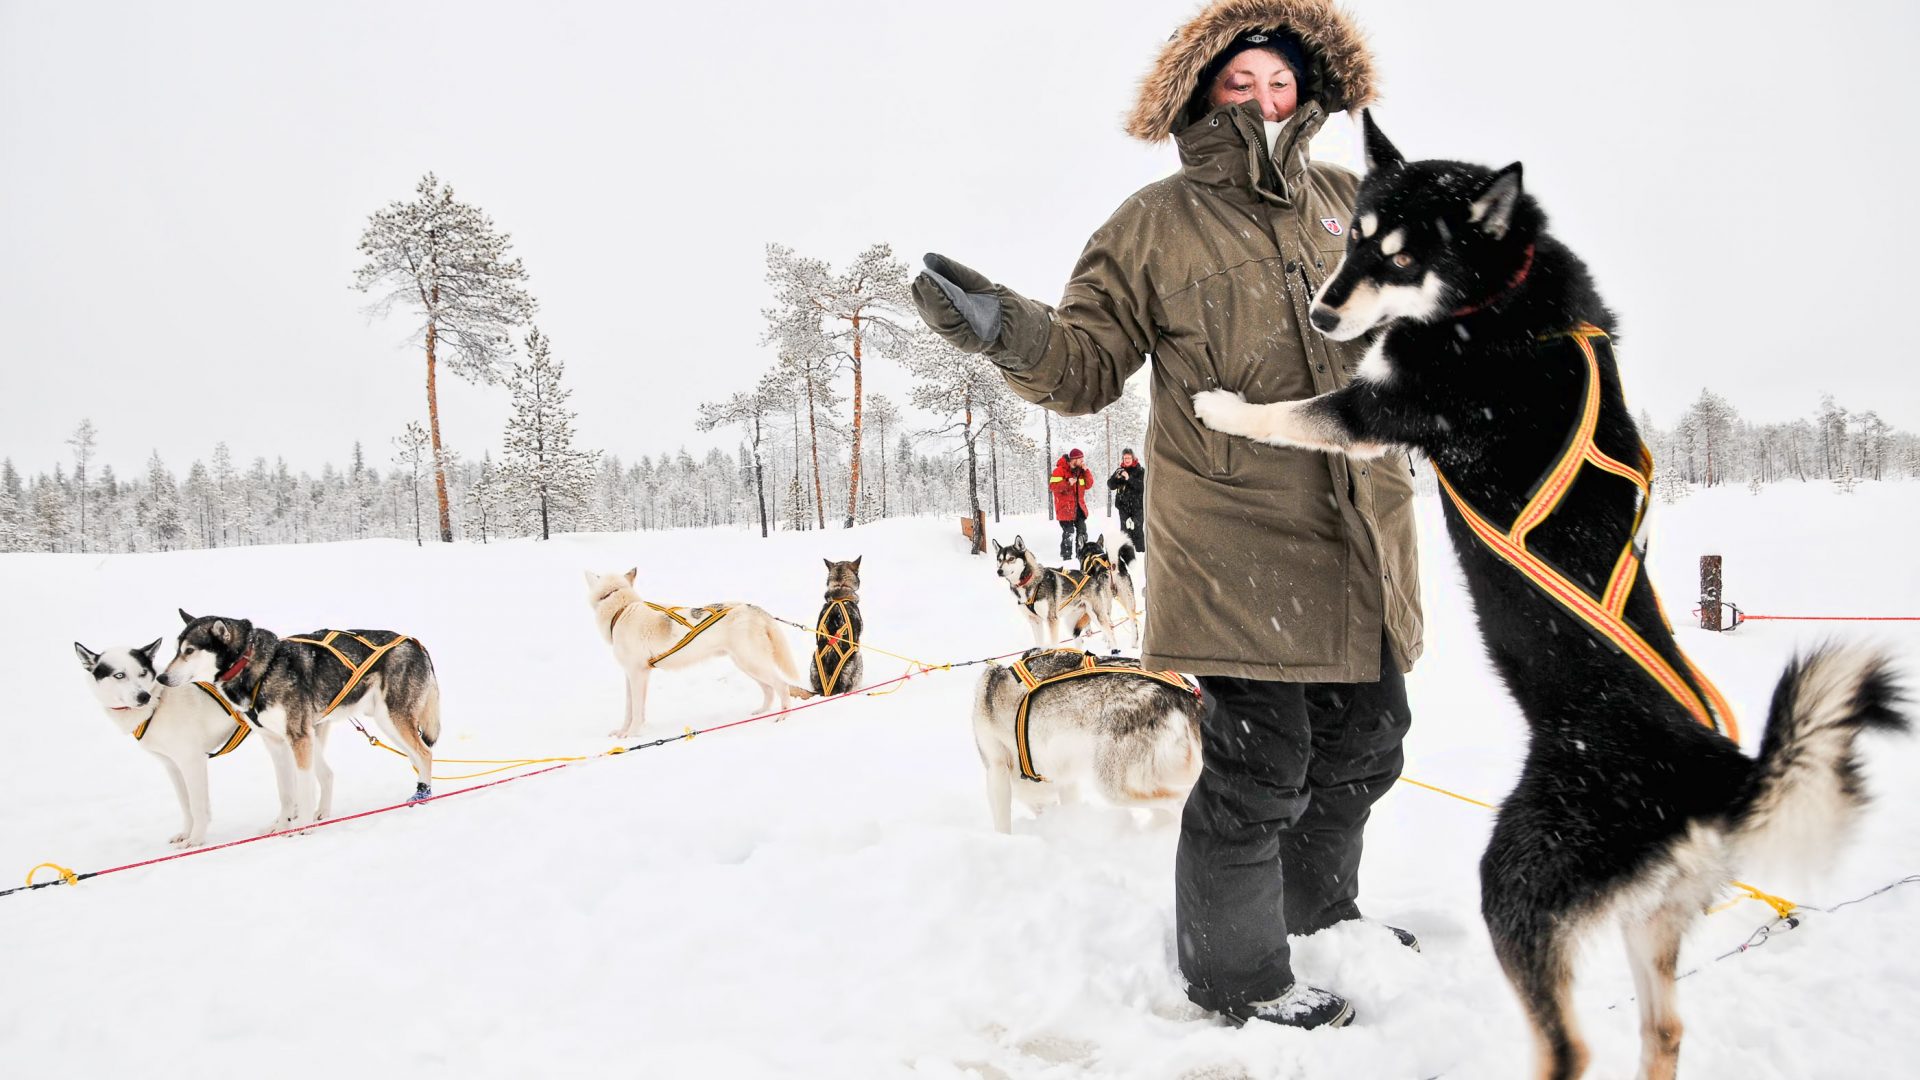 A person smiles as a dog sledding dog jumps up on her.